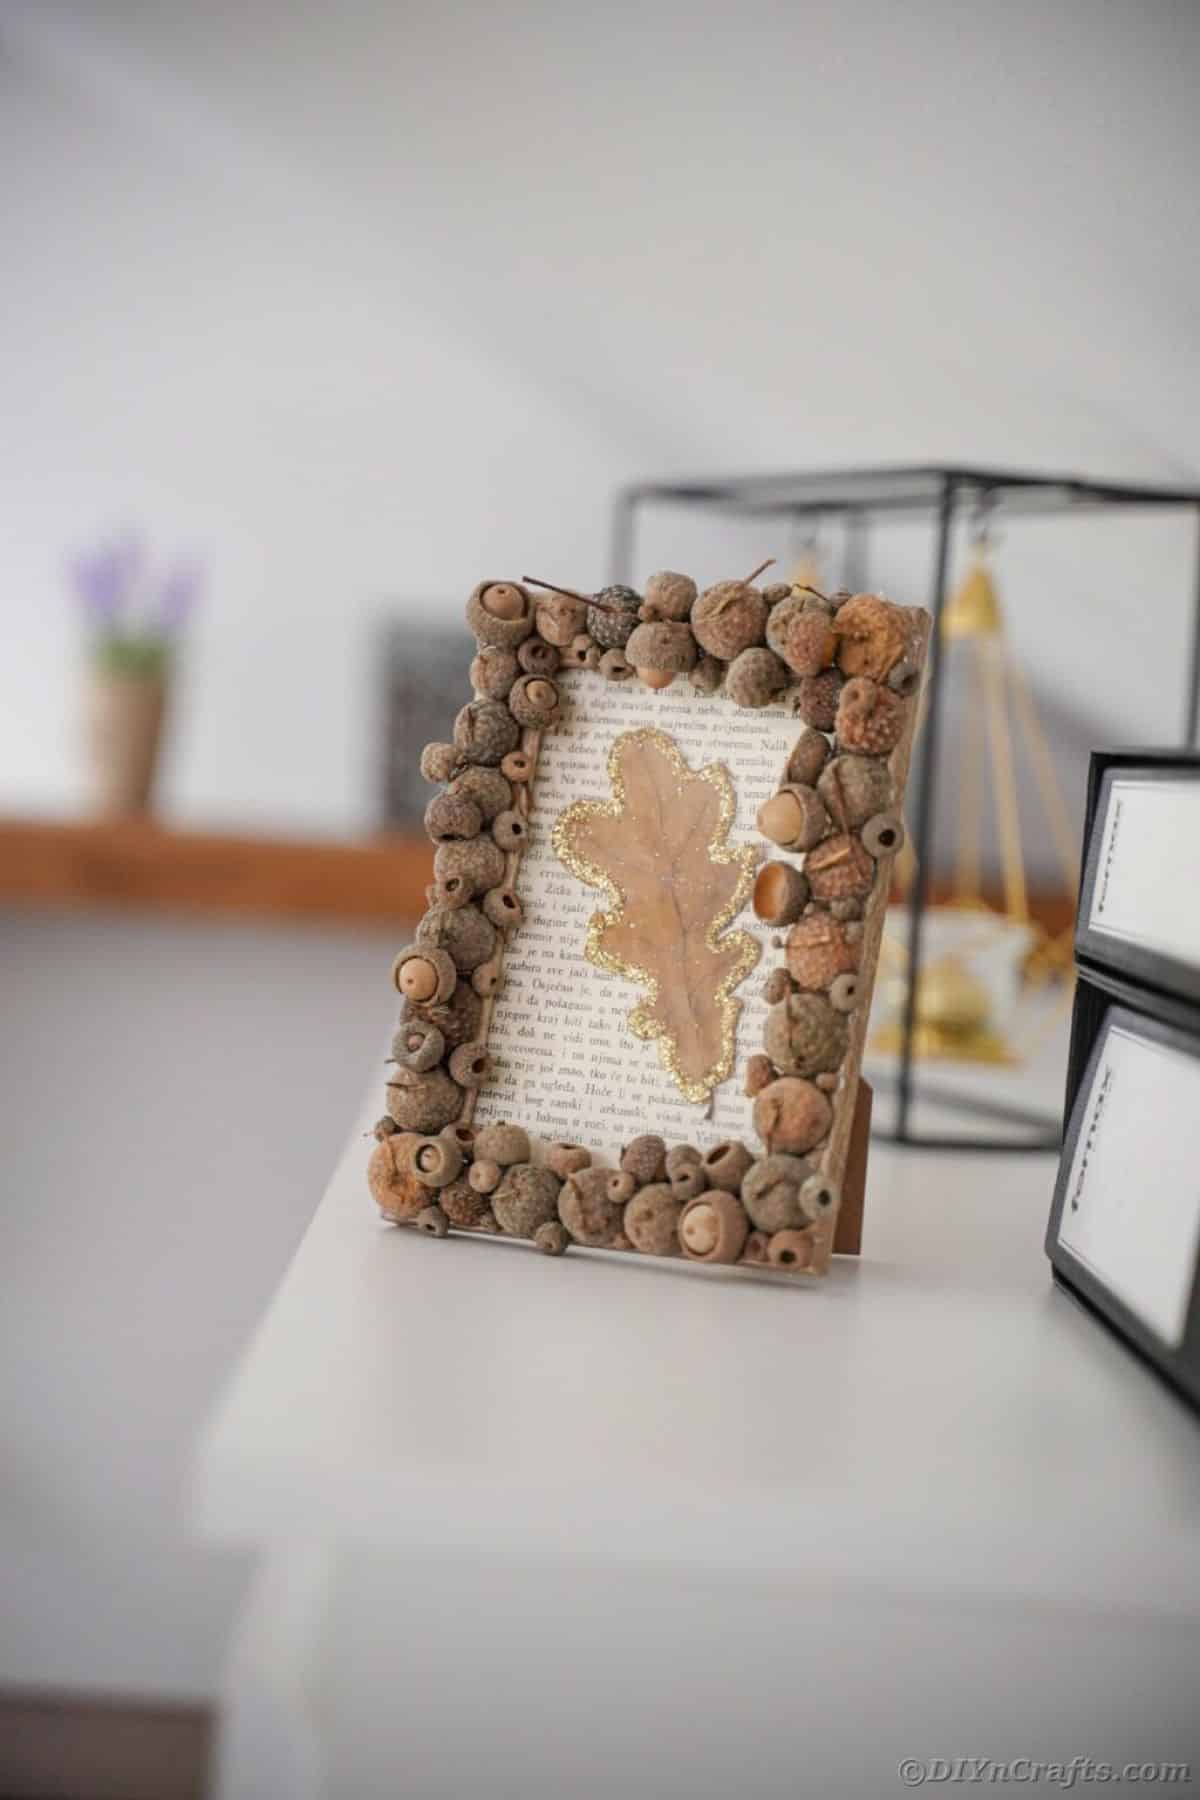 DIY Rustic Framed Old Book Page Decor with Acorns